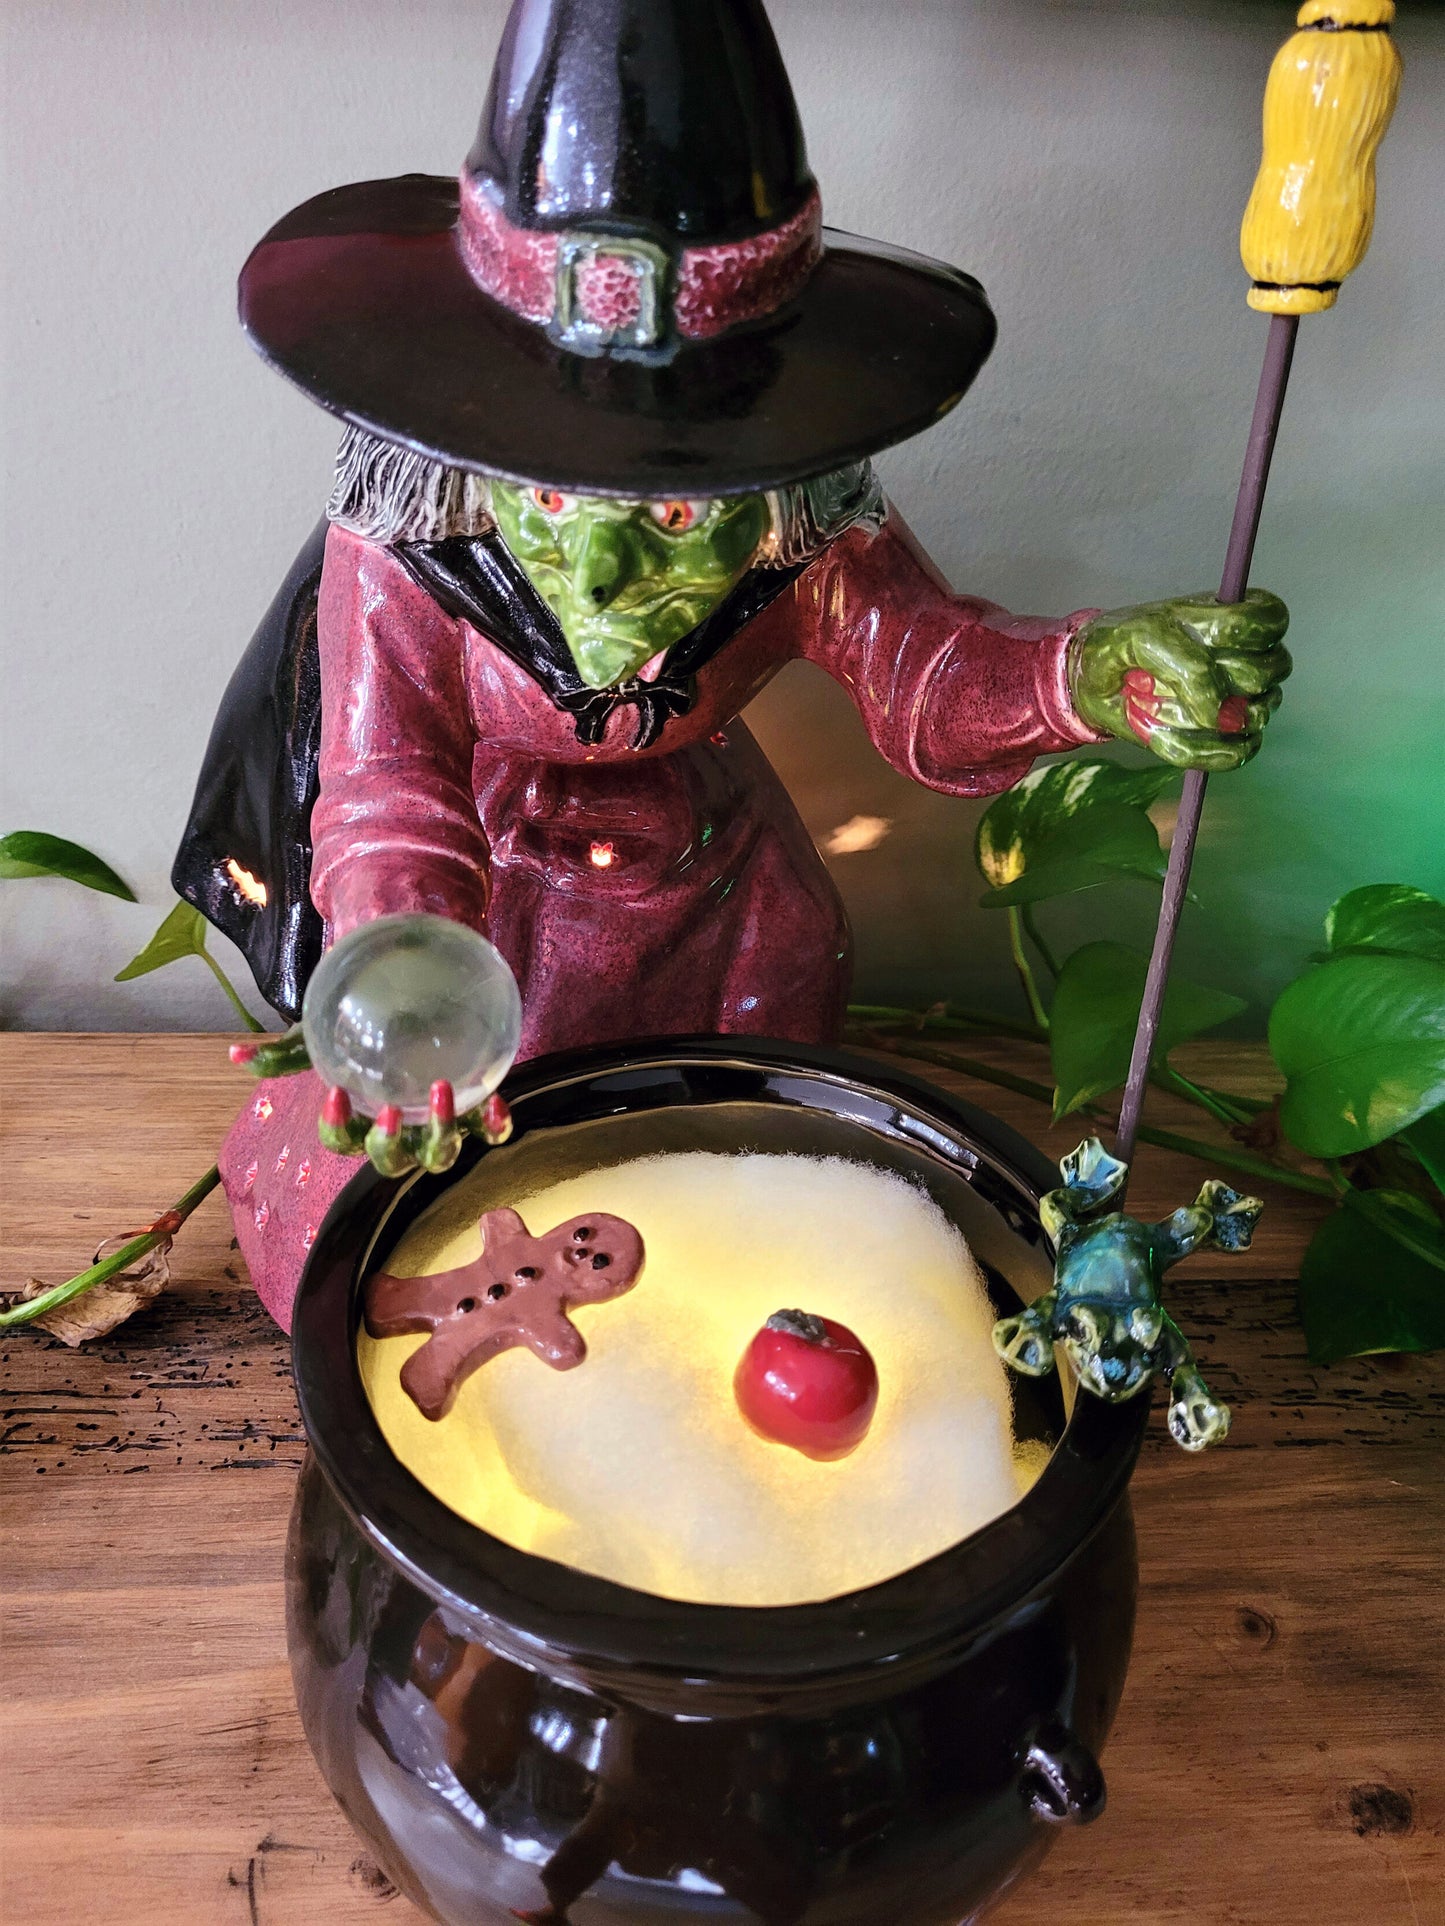 Wicked Witch & Caldron that lights up.